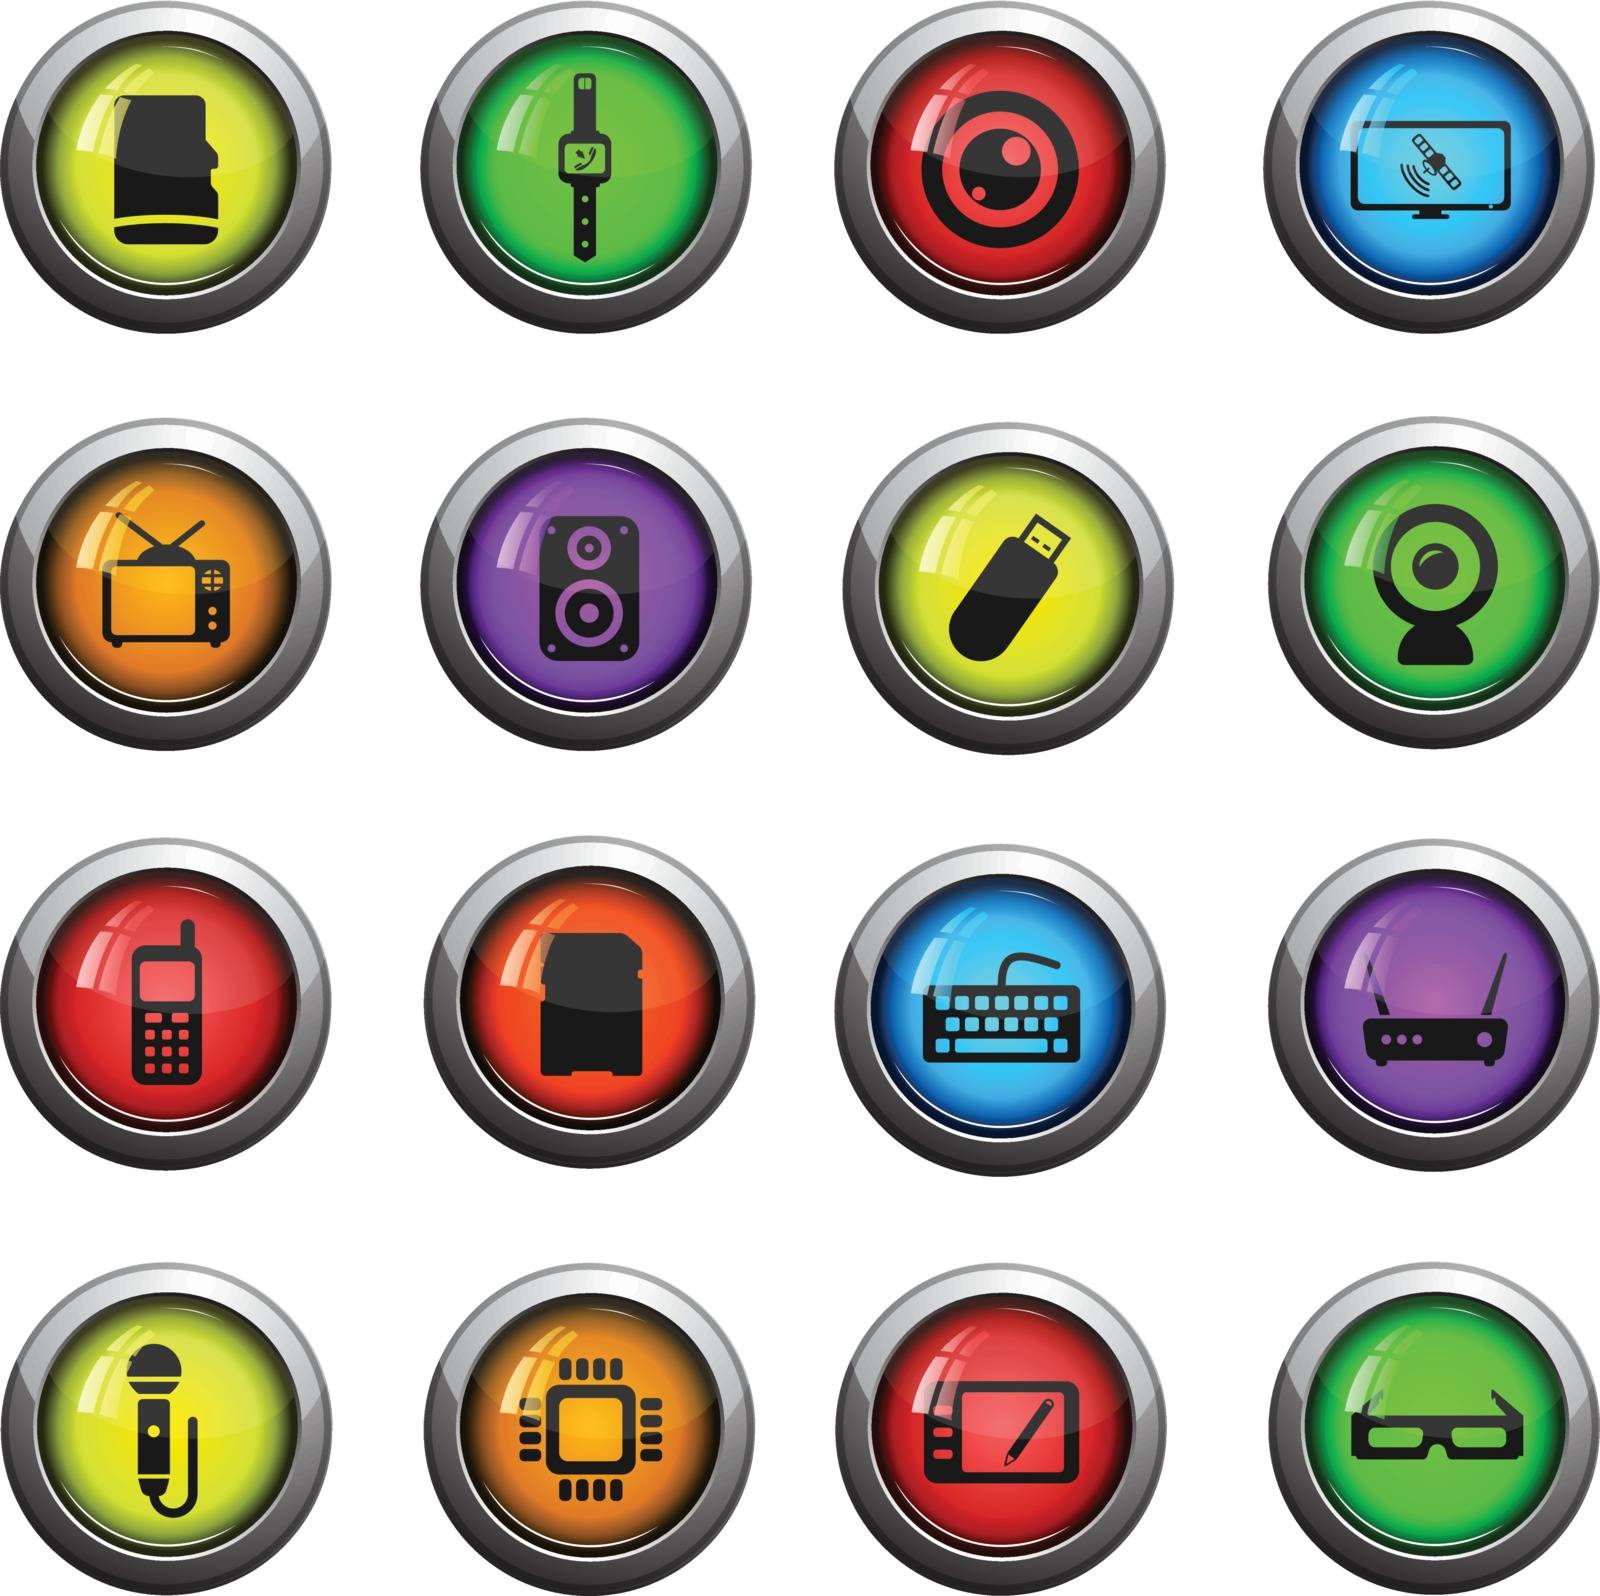 Gadgets icons set for web sites and user interface